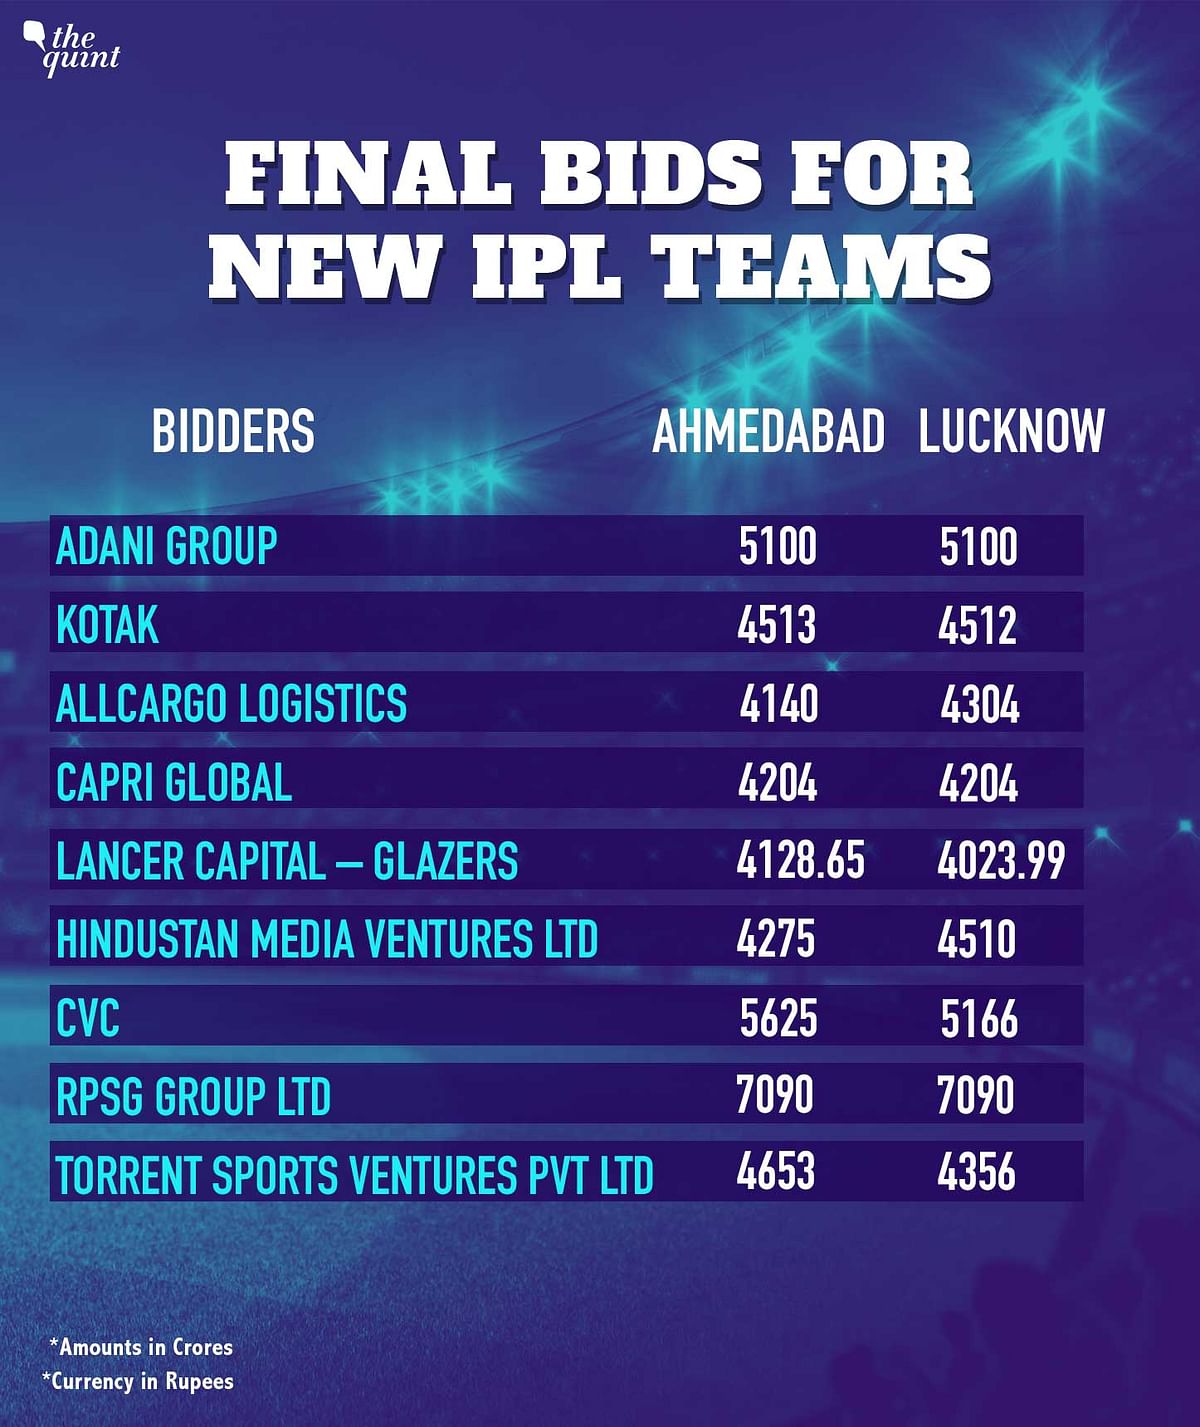 The IPL will have one new owner from next season as two teams will be added. 